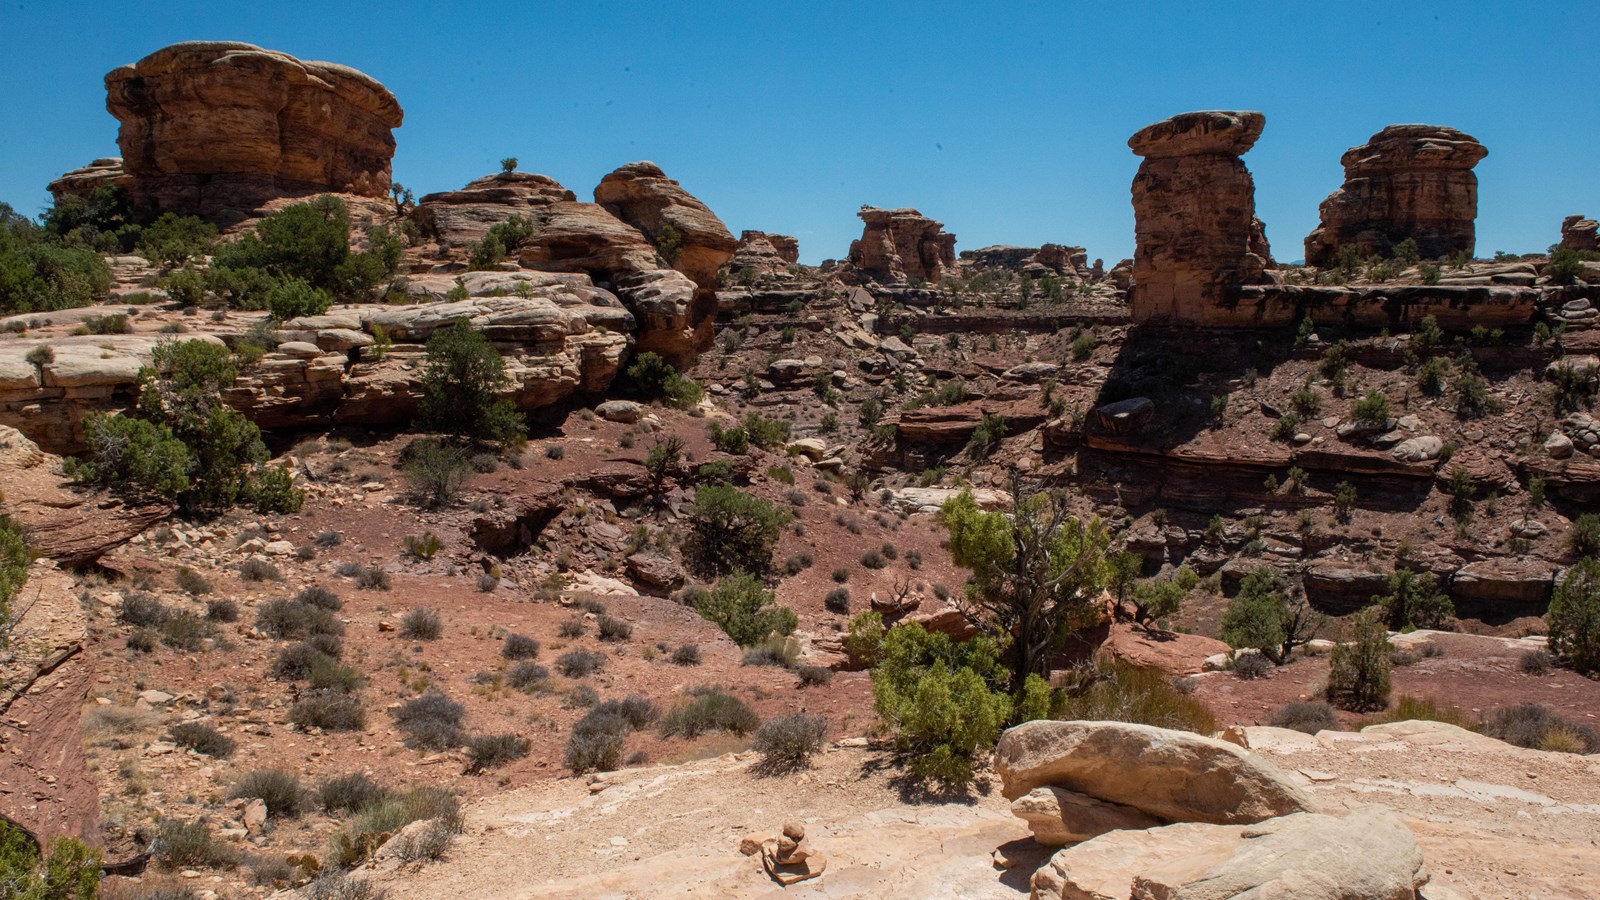 Brown rock spires, beige sandstone benches, and green shrubs line the canyon at Big Spring Overlook.